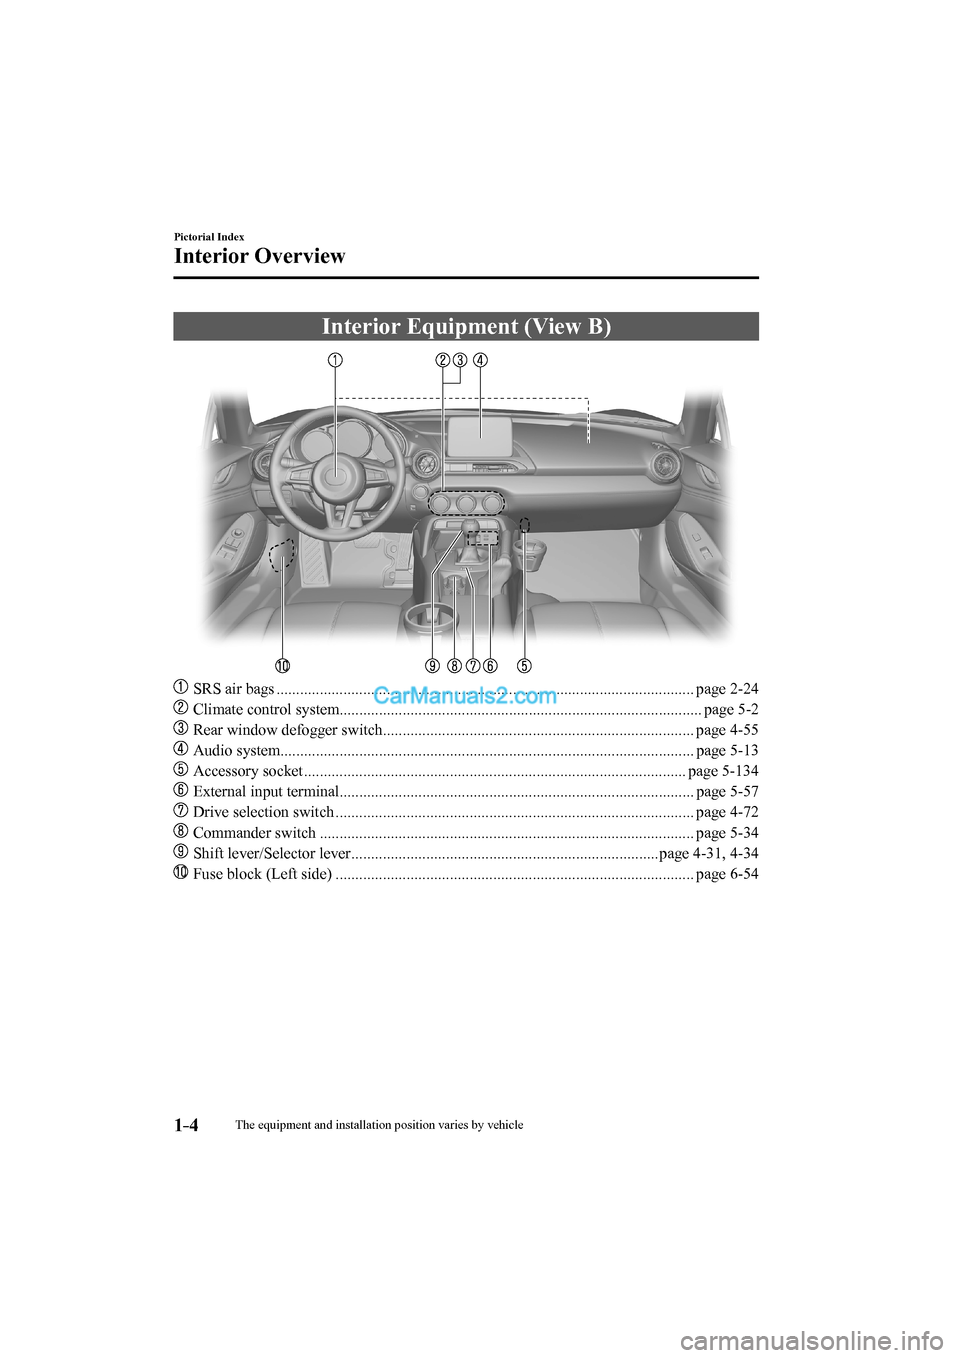 MAZDA MODEL MX-5 2017  Owners Manual (in English) 1–4
Pictorial Index
Interior Overview
 Interior Equipment (View B)
    
���
  SRS air bags ........................................................................................................